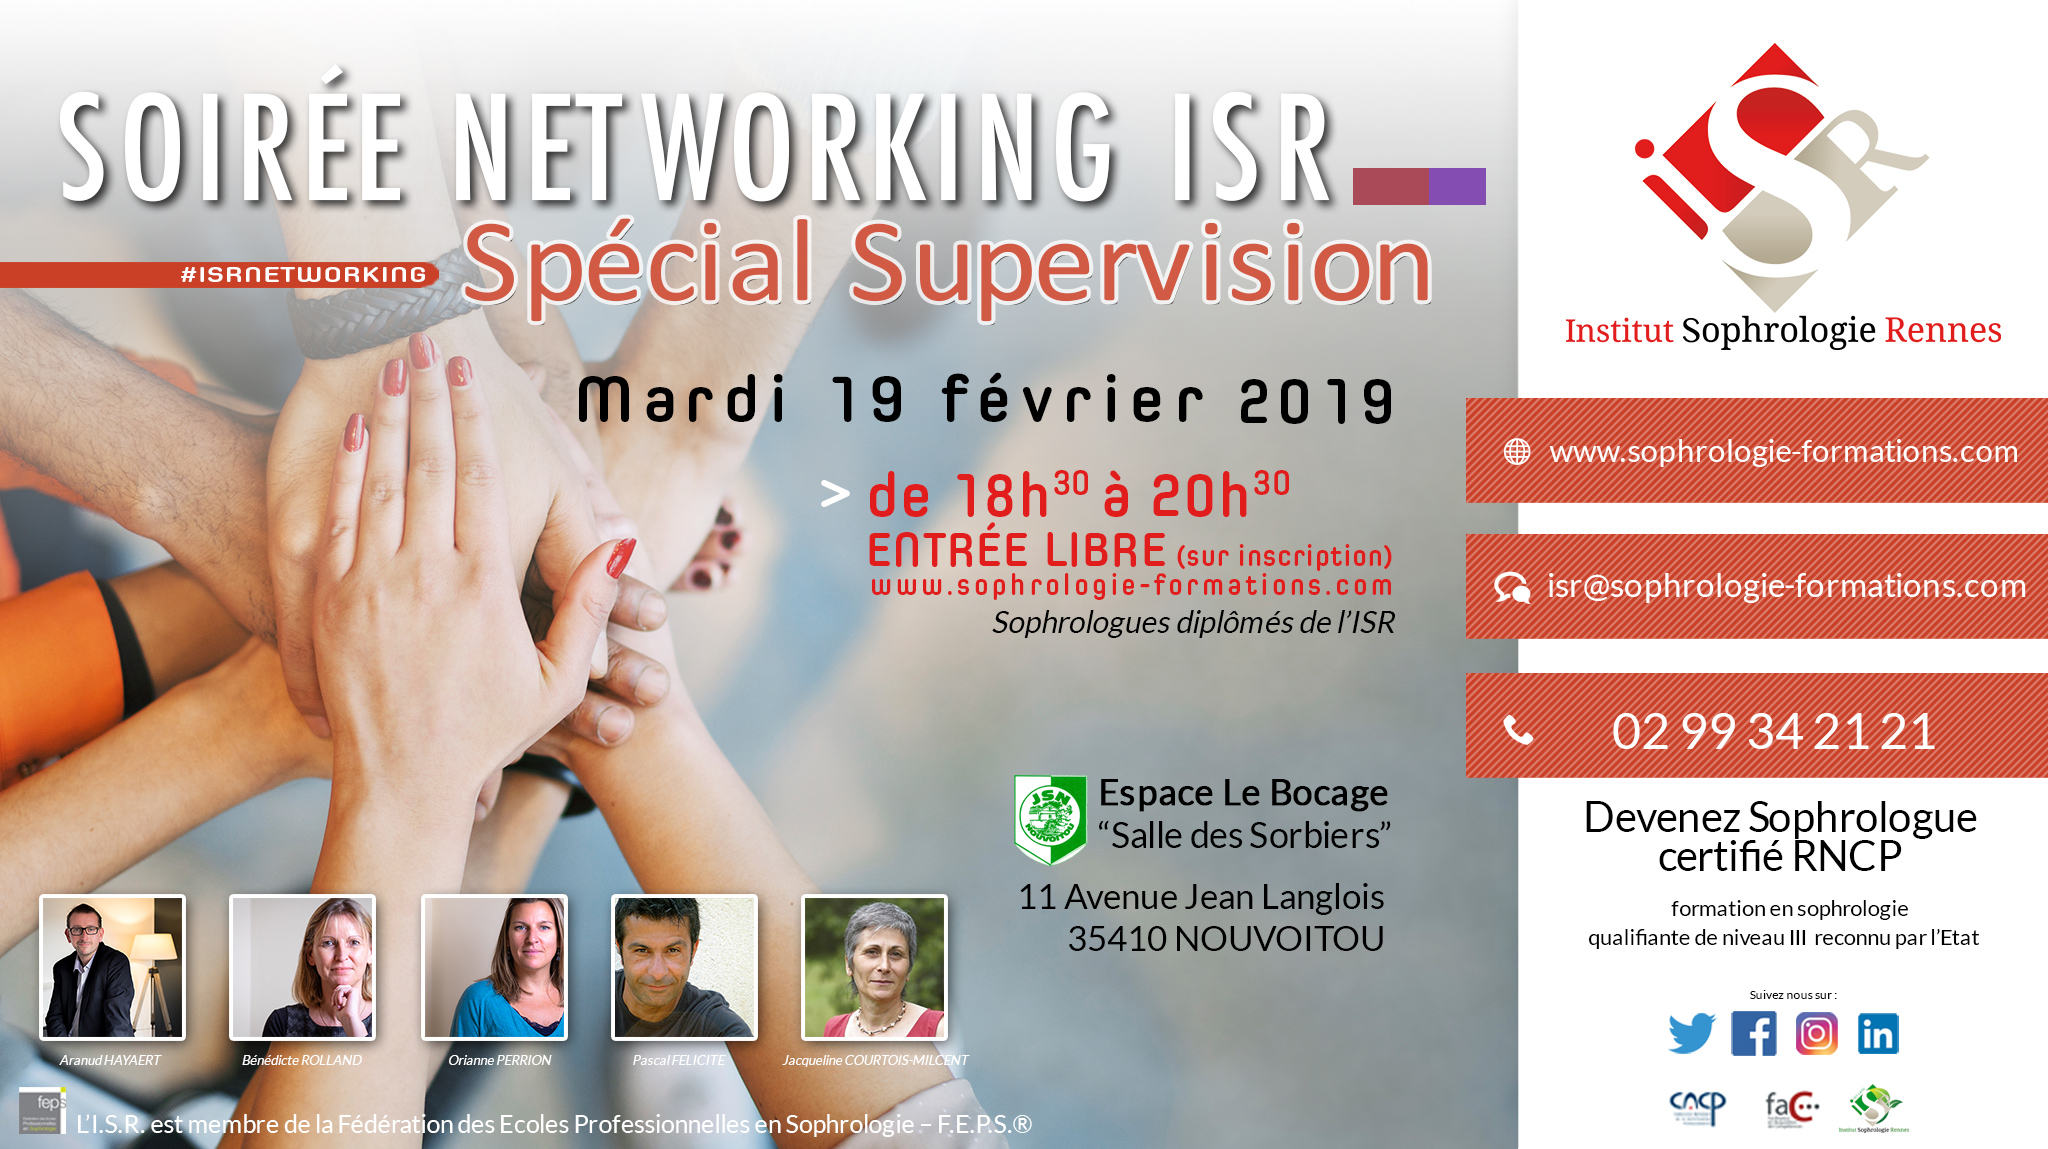 Networking Supervision - ISR